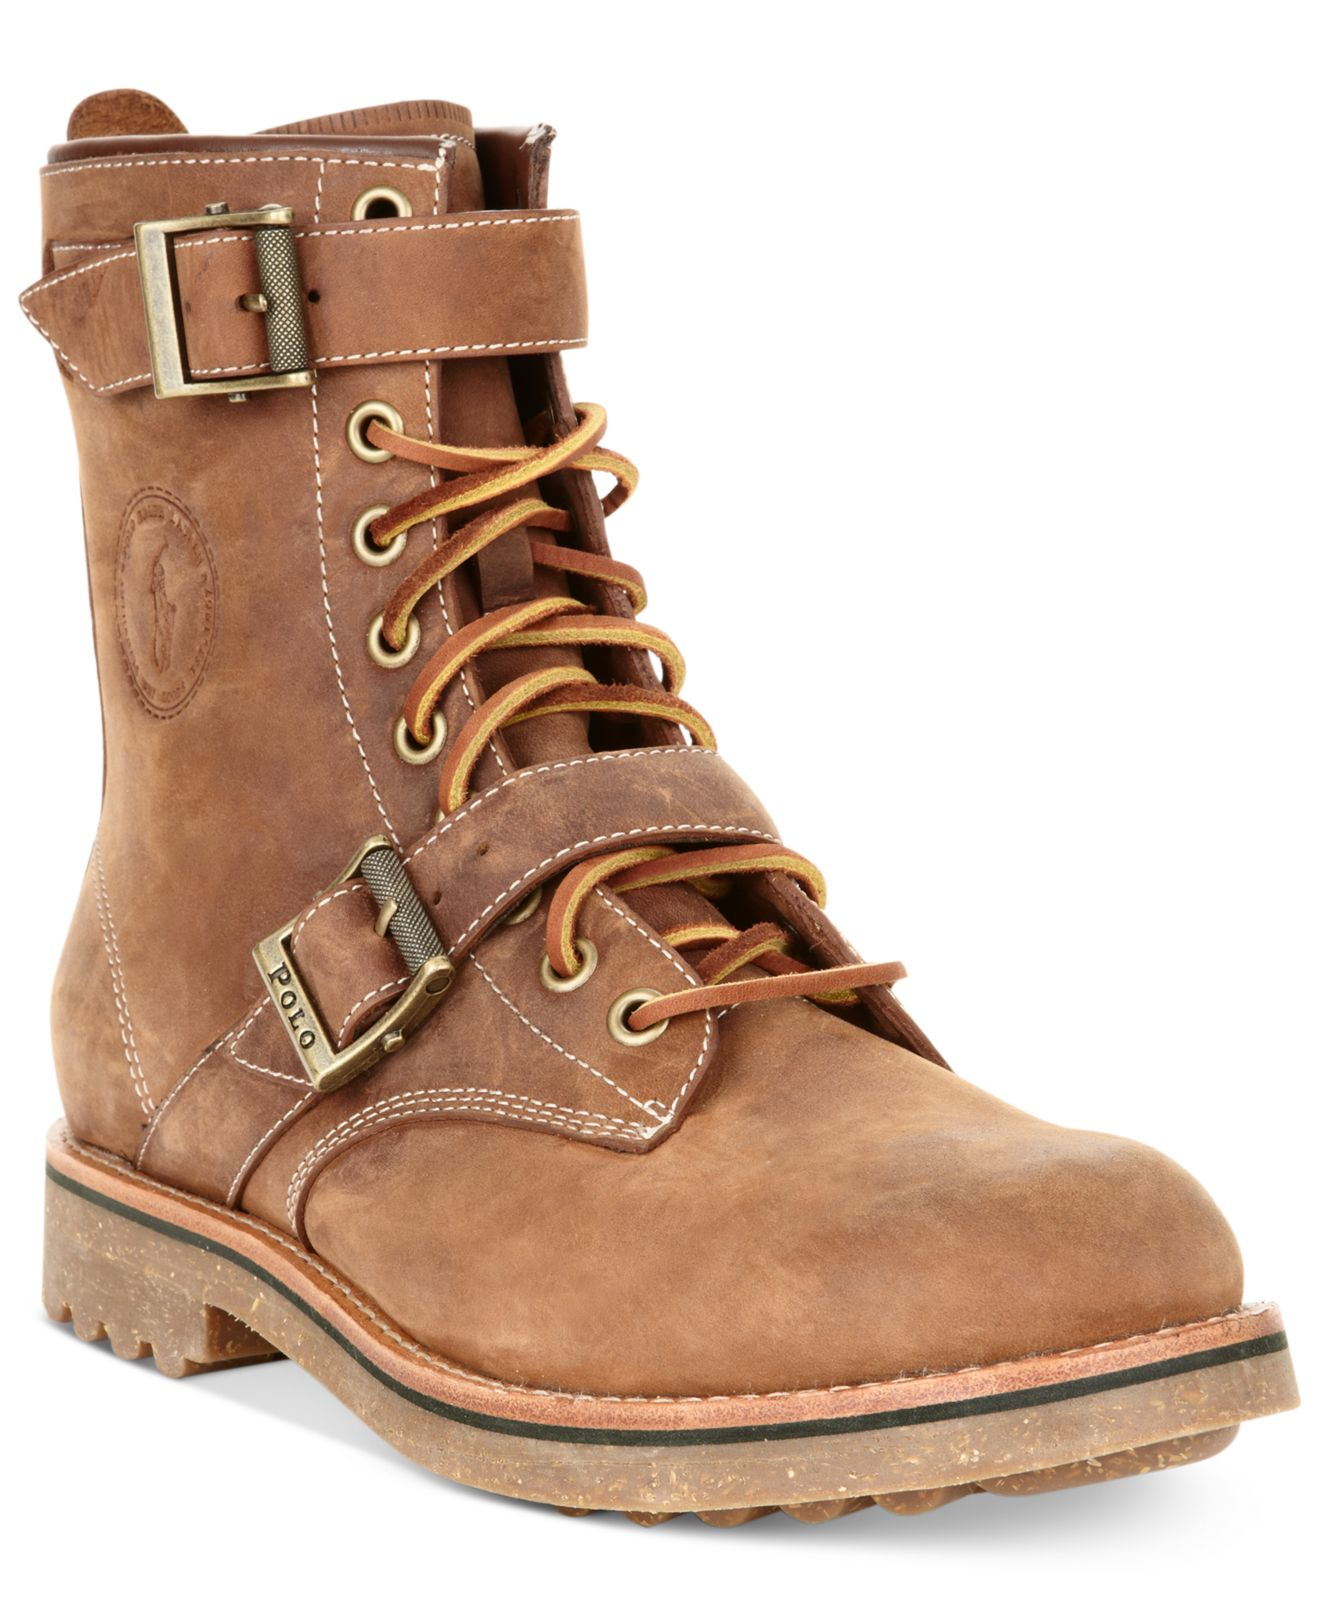 Polo Ralph Lauren Maurice Boots in Brown for Men - Lyst